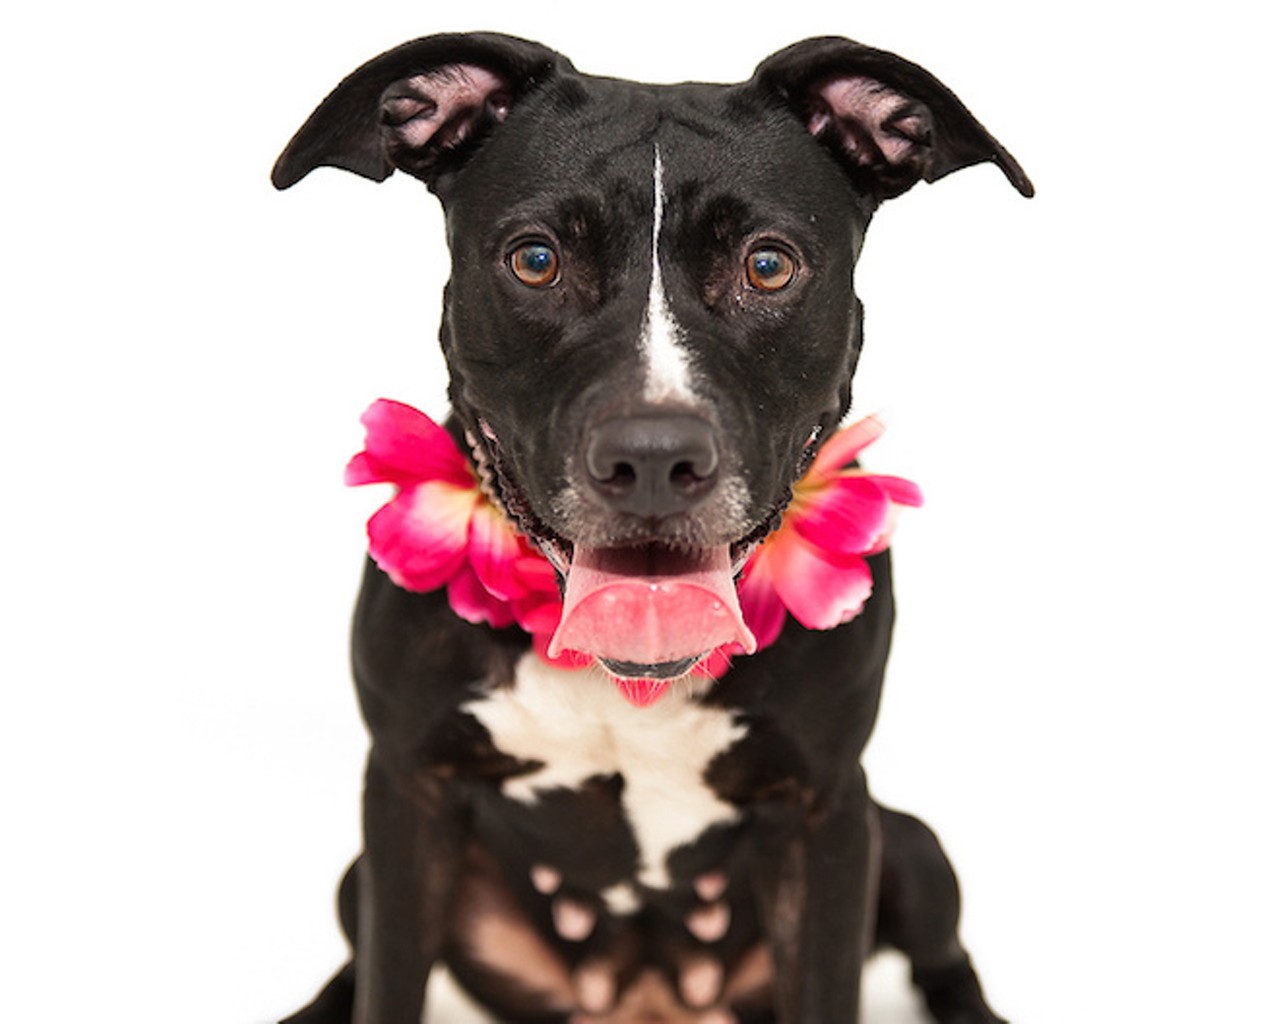 23 adoptable dogs looking for a place to call home